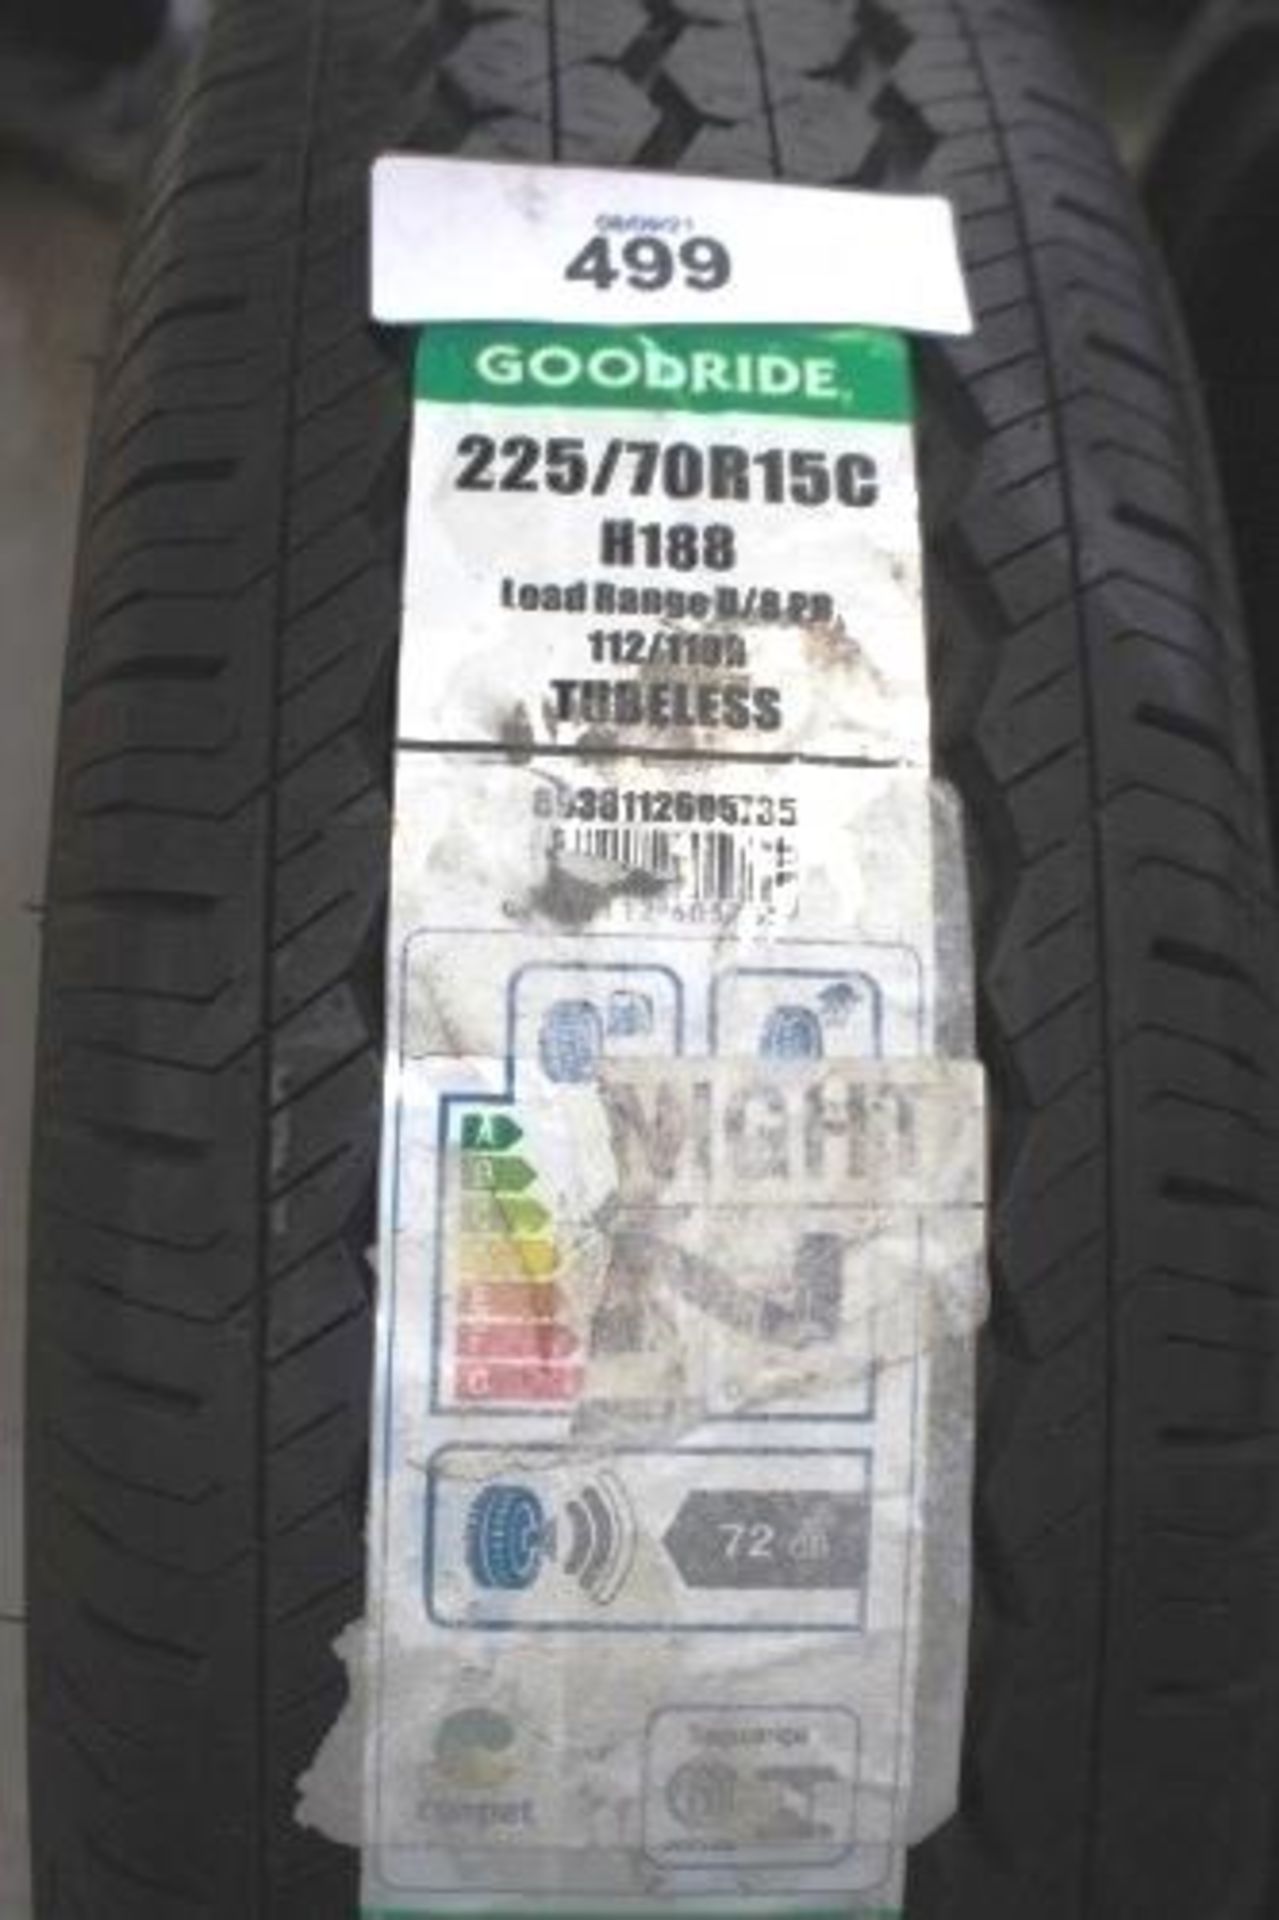 1 x Good Ride tyre, 225/75R15C - New (top shed)